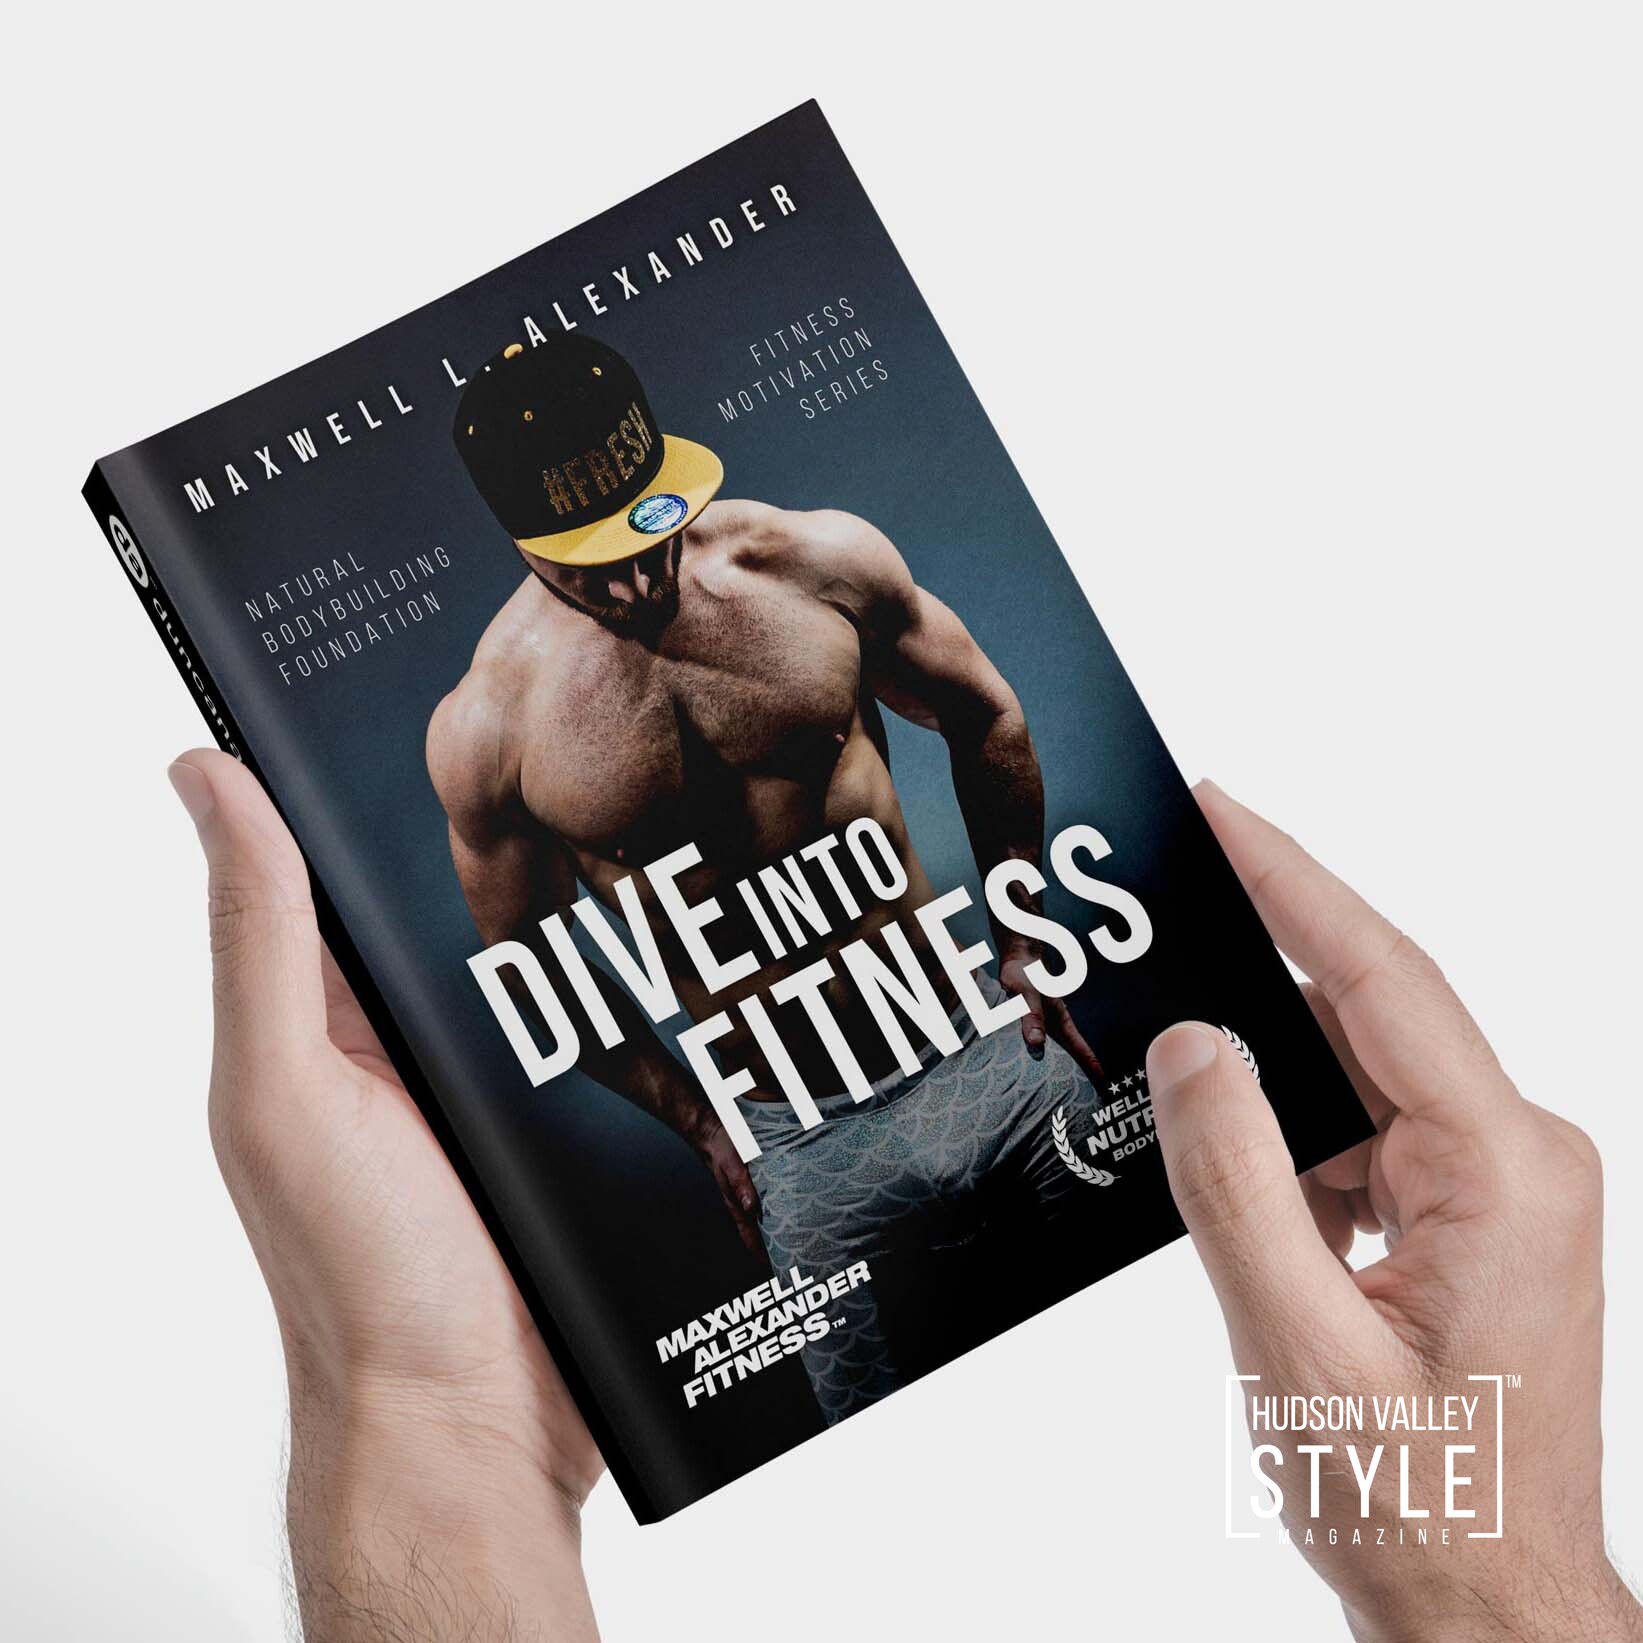 Dive Into Fitness with Coach Maxwell Alexander – Download this New Fitness Motivation eBook from Simplida.com